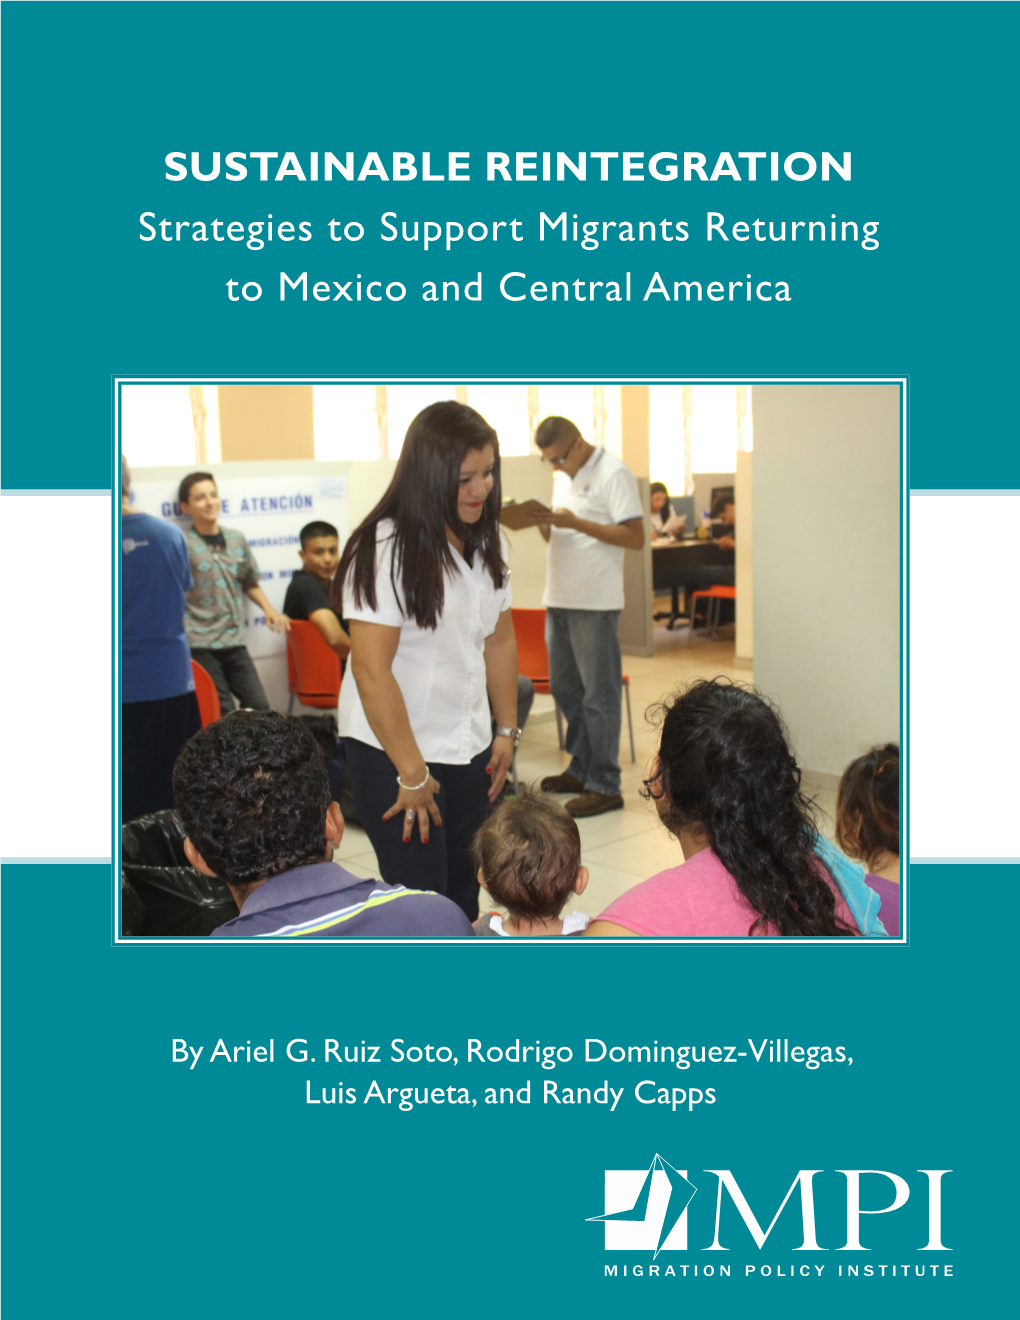 Sustainable Reintegration: Strategies to Support Migrants Returning to Mexico and Central America